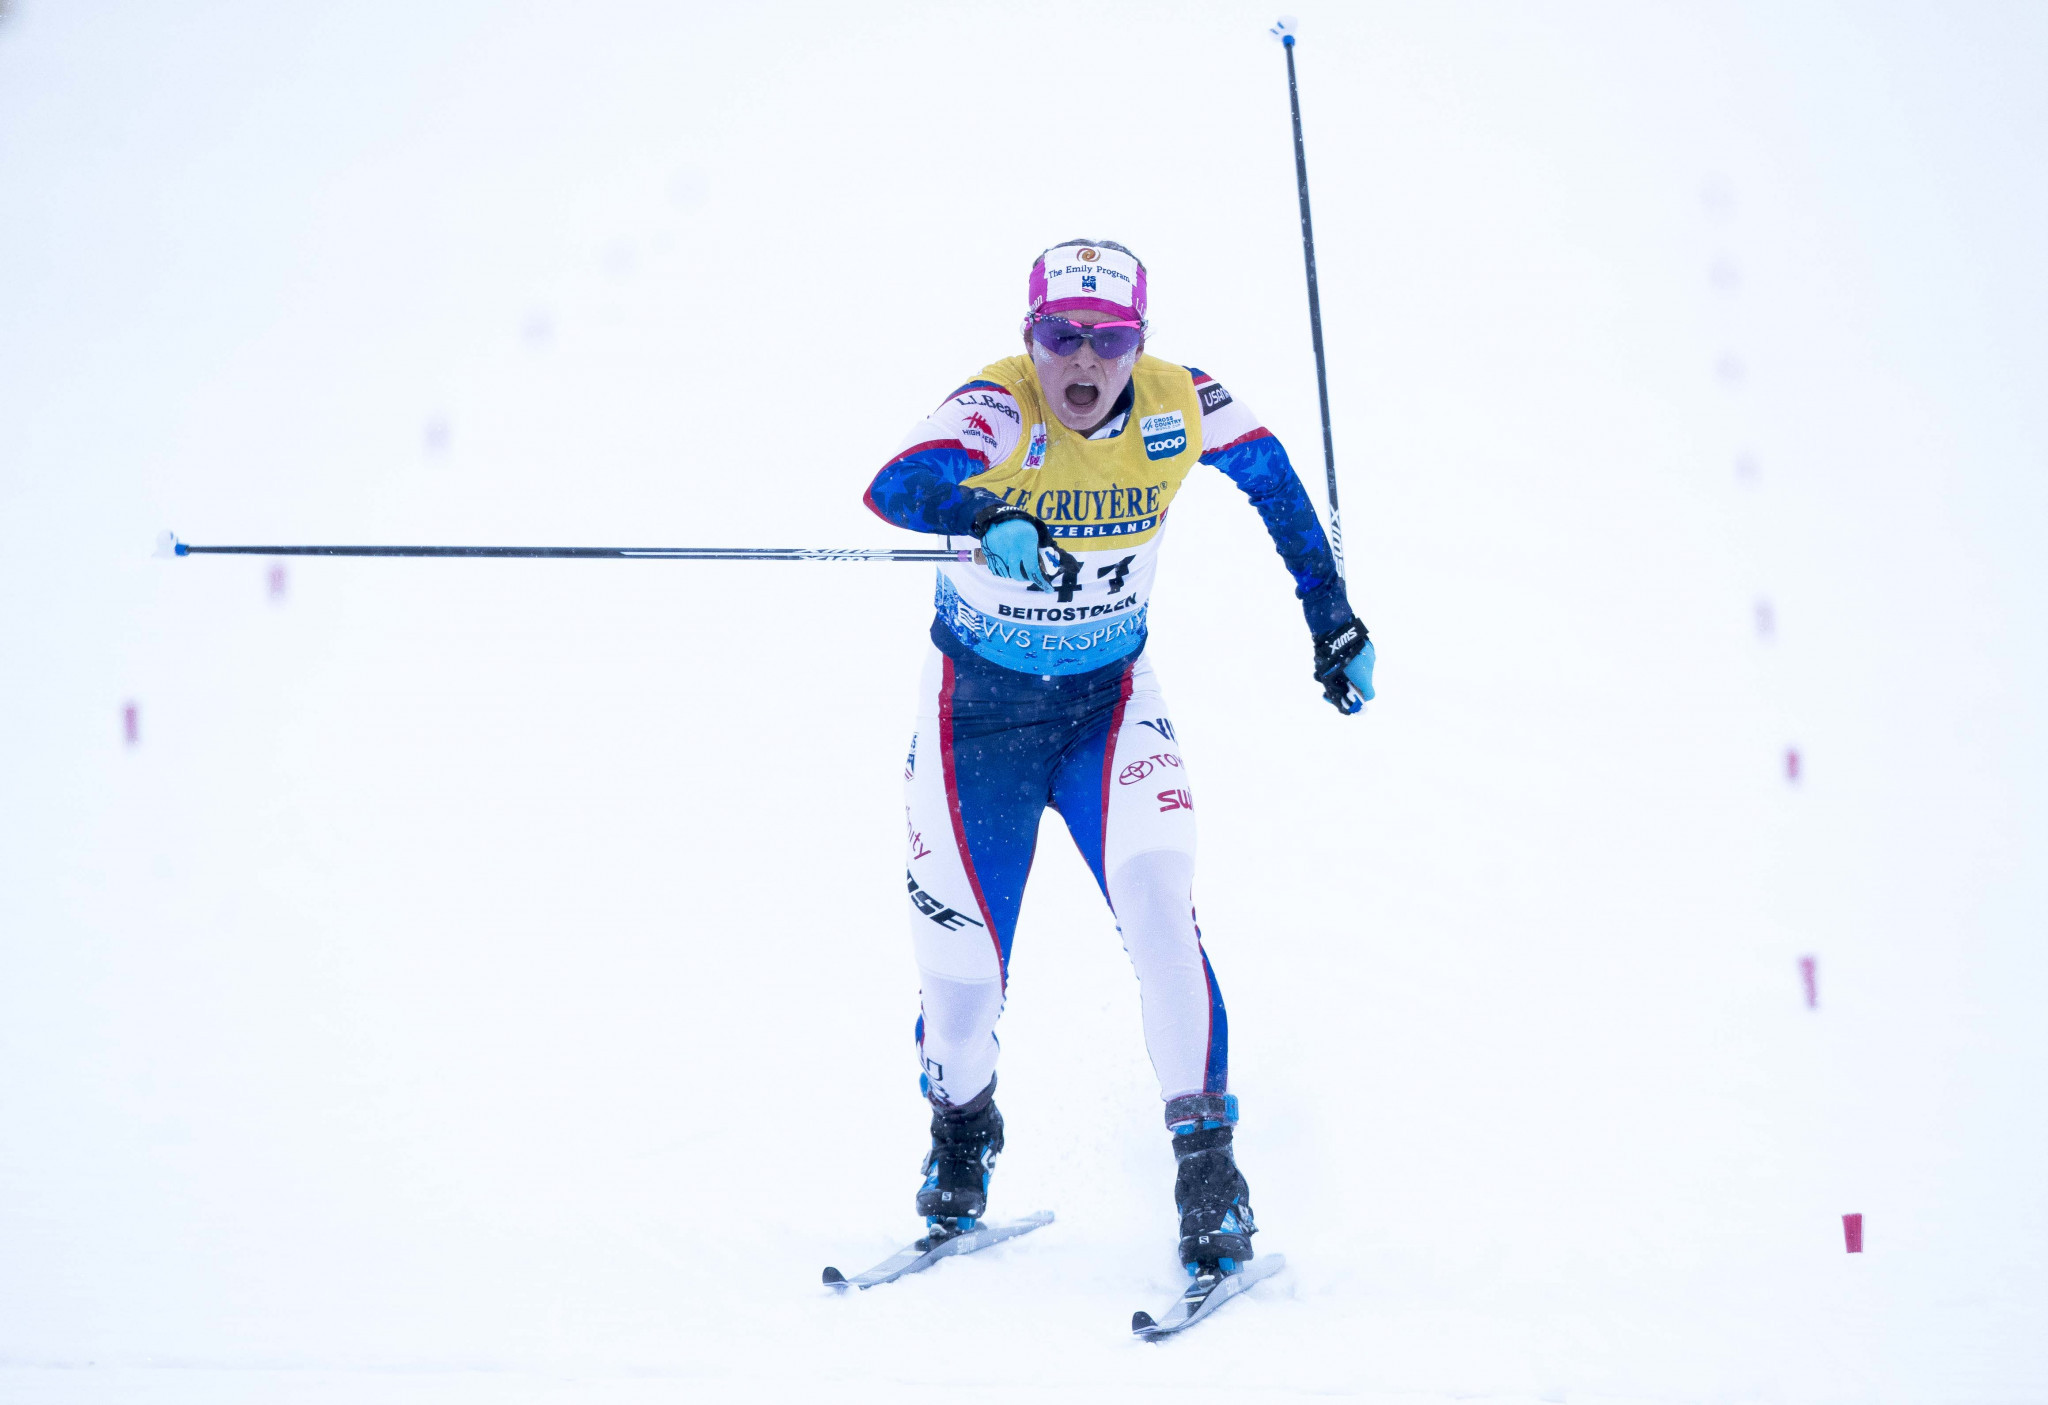 Diggins gains first win of season as Pellegrino triumphs on home snow at FIS Cross-Country World Cup in Cogne